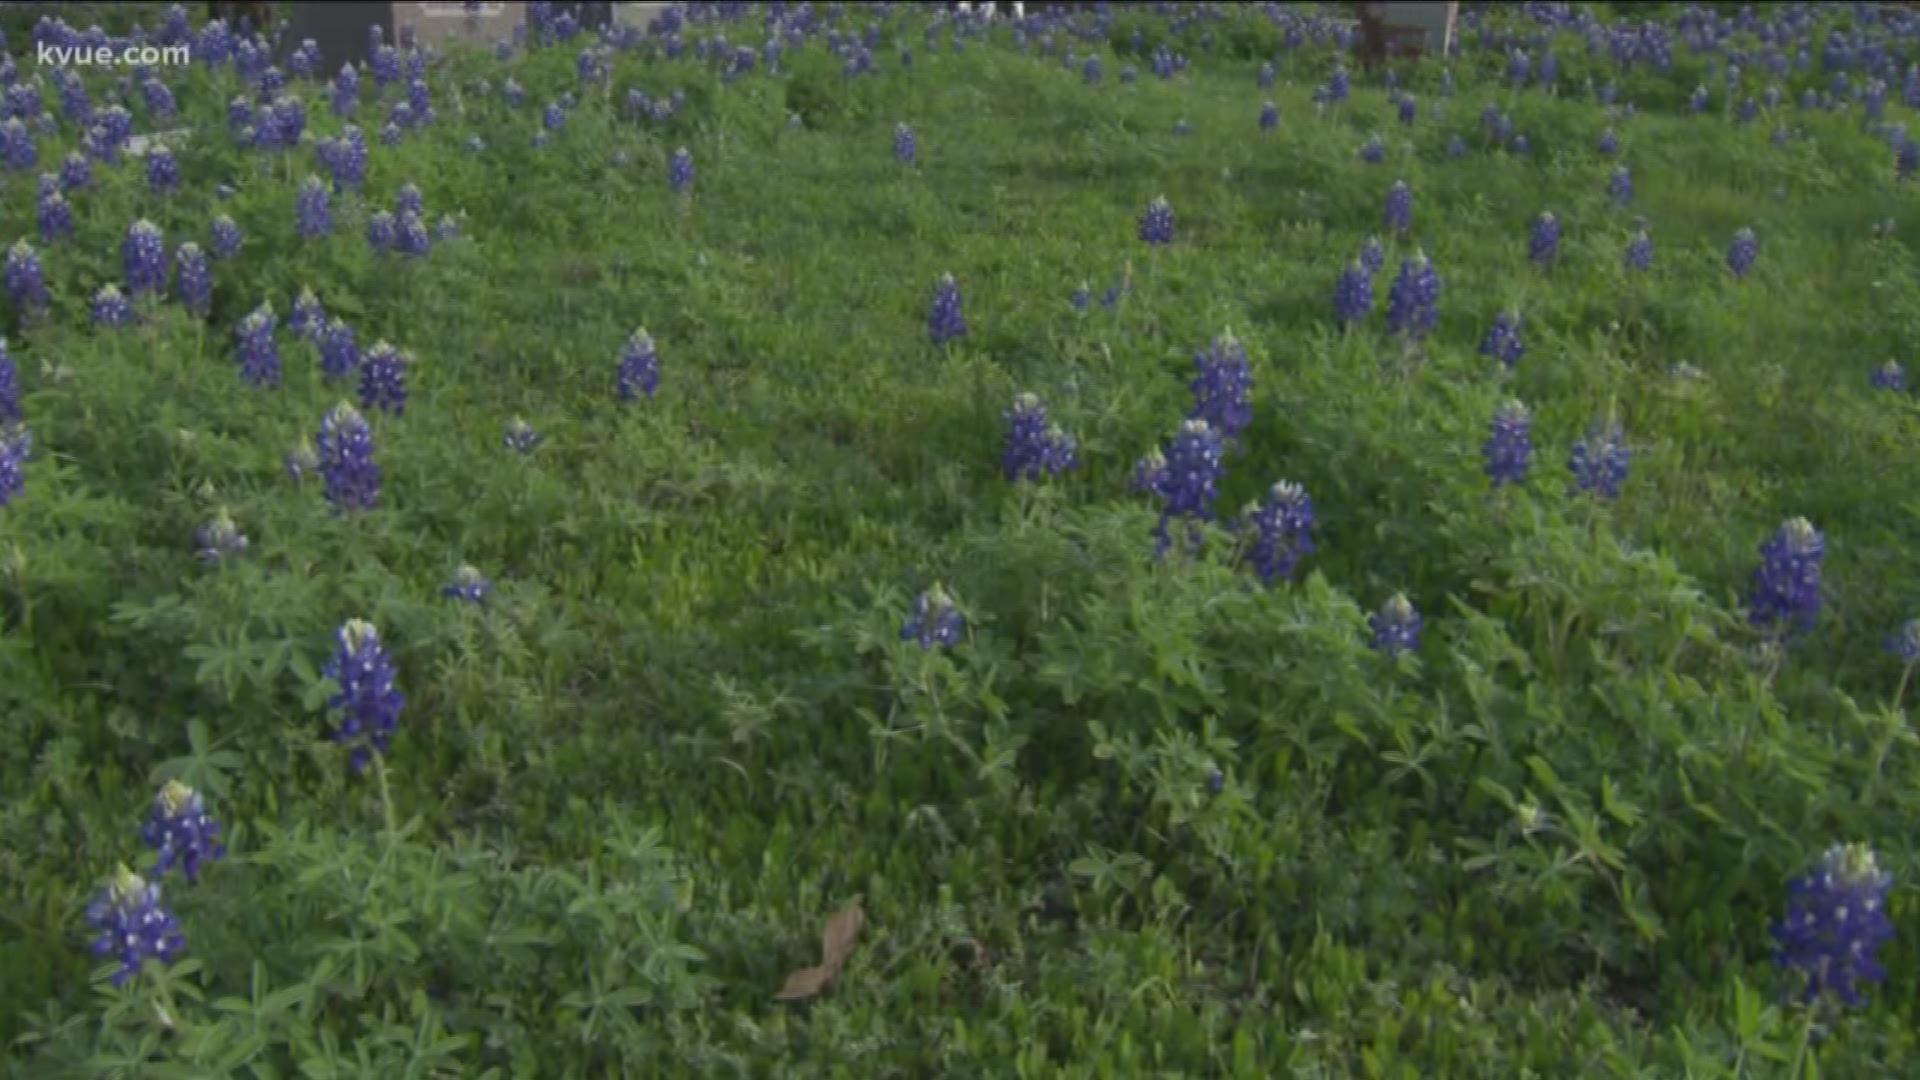 Many people are wondering if the current cold temperatures are putting Texas bluebonnets in jeopardy.